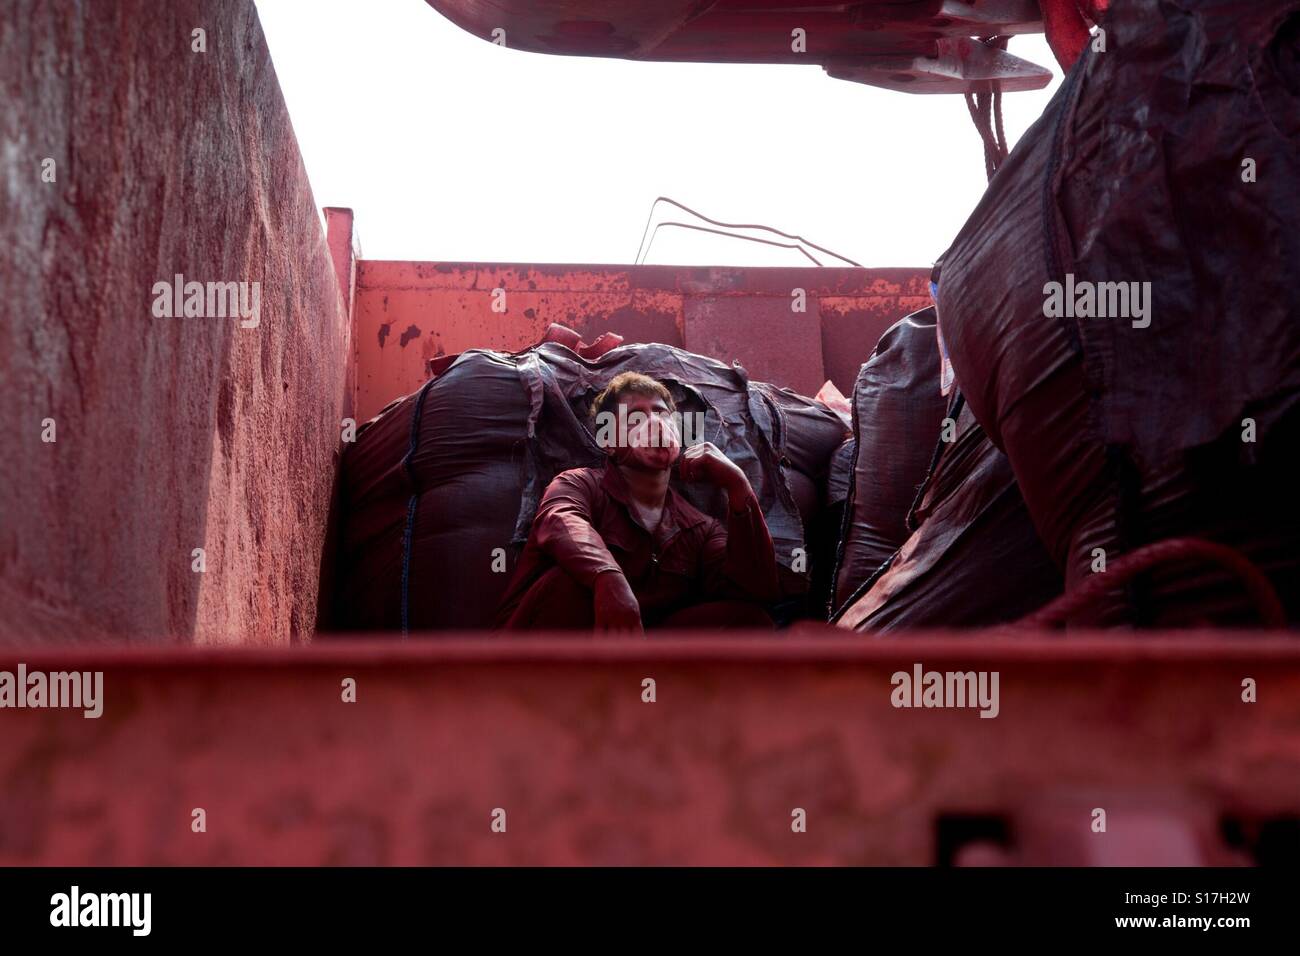 Here is amir one worker of red earth mineral he got tired and take break a little for doing his job again. Stock Photo